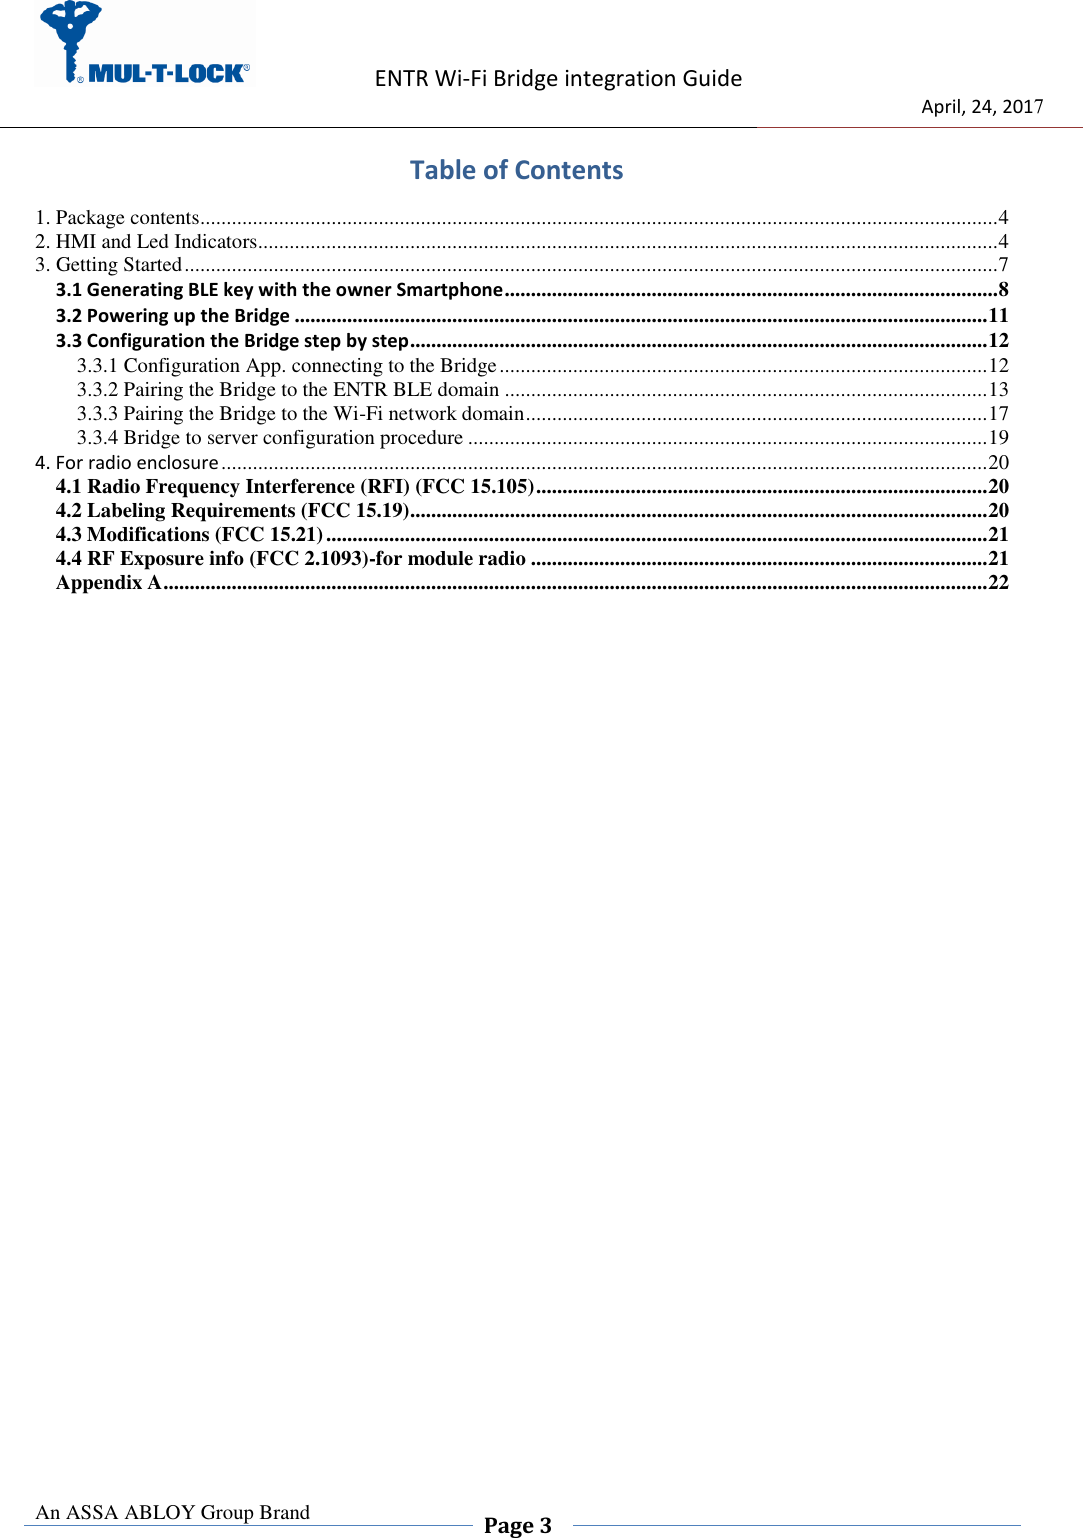                    ENTR Wi-Fi Bridge integration Guide                                  April, 24, 2017  An ASSA ABLOY Group Brand  Page 3    Table of Contents 1. Package contents........................................................................................................................................................ 4 2. HMI and Led Indicators............................................................................................................................................. 4 3. Getting Started ........................................................................................................................................................... 7 3.1 Generating BLE key with the owner Smartphone .............................................................................................. 8 3.2 Powering up the Bridge .................................................................................................................................... 11 3.3 Configuration the Bridge step by step .............................................................................................................. 12 3.3.1 Configuration App. connecting to the Bridge ............................................................................................. 12 3.3.2 Pairing the Bridge to the ENTR BLE domain ............................................................................................ 13 3.3.3 Pairing the Bridge to the Wi-Fi network domain ........................................................................................ 17 3.3.4 Bridge to server configuration procedure ................................................................................................... 19 4. For radio enclosure .................................................................................................................................................. 20 4.1 Radio Frequency Interference (RFI) (FCC 15.105) ...................................................................................... 20 4.2 Labeling Requirements (FCC 15.19) .............................................................................................................. 20 4.3 Modifications (FCC 15.21) .............................................................................................................................. 21 4.4 RF Exposure info (FCC 2.1093)-for module radio ....................................................................................... 21 Appendix A ............................................................................................................................................................. 22 